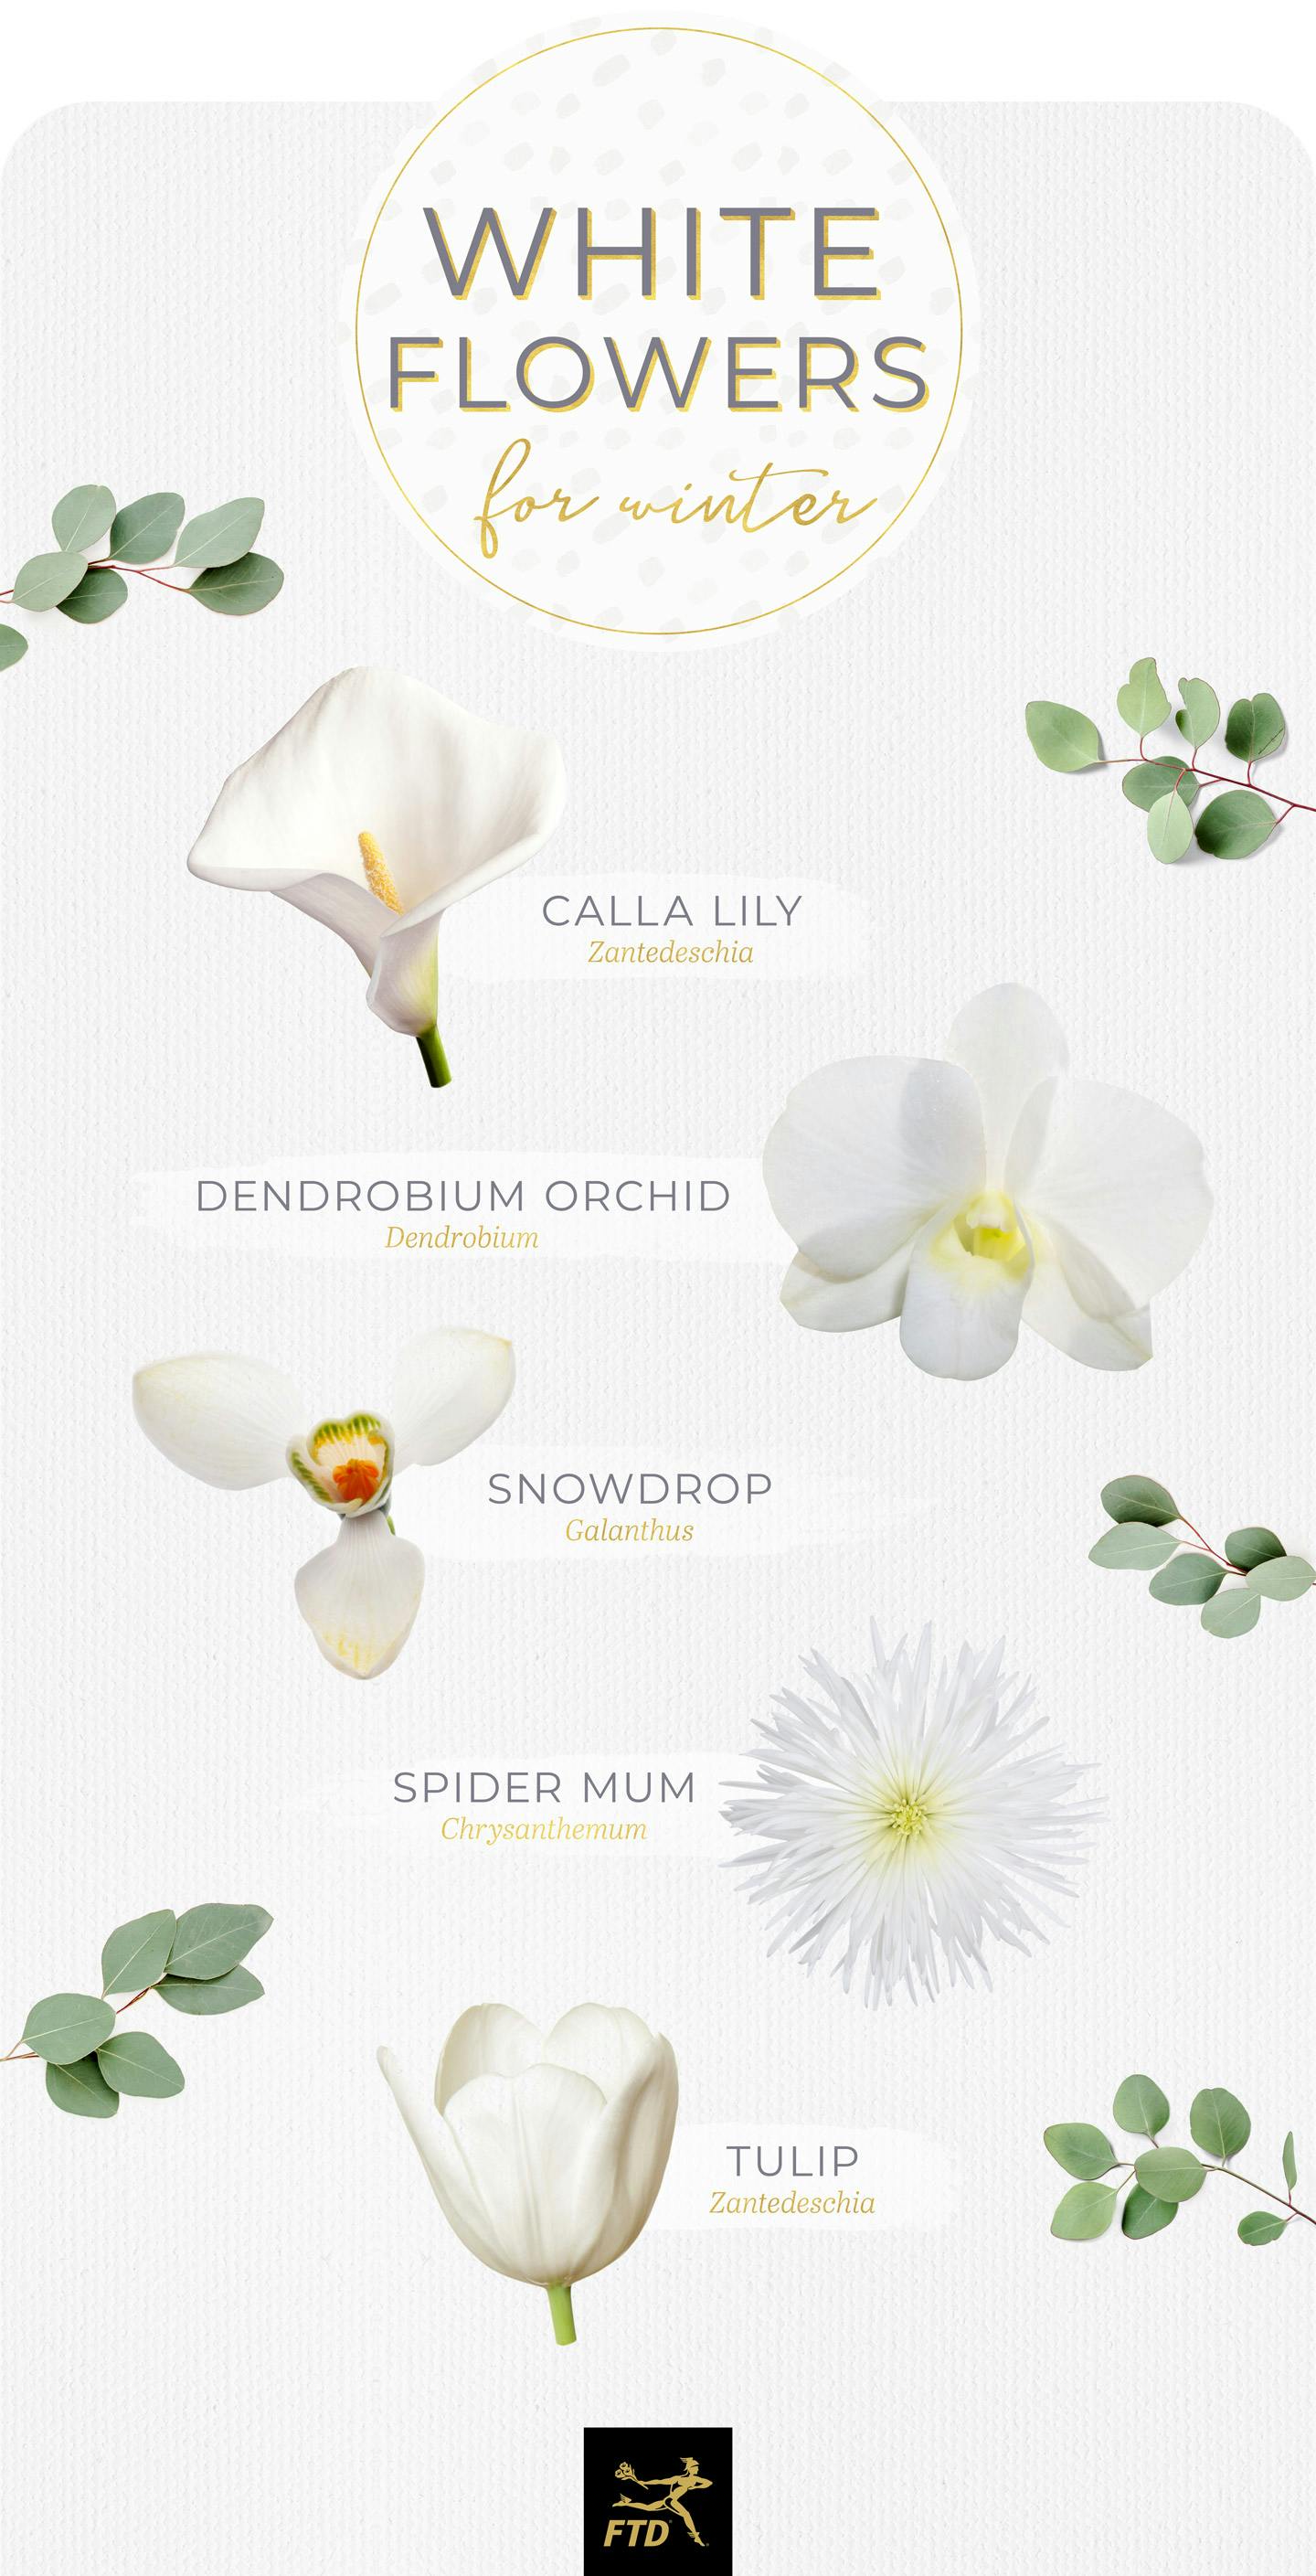 40 Types of White Flowers